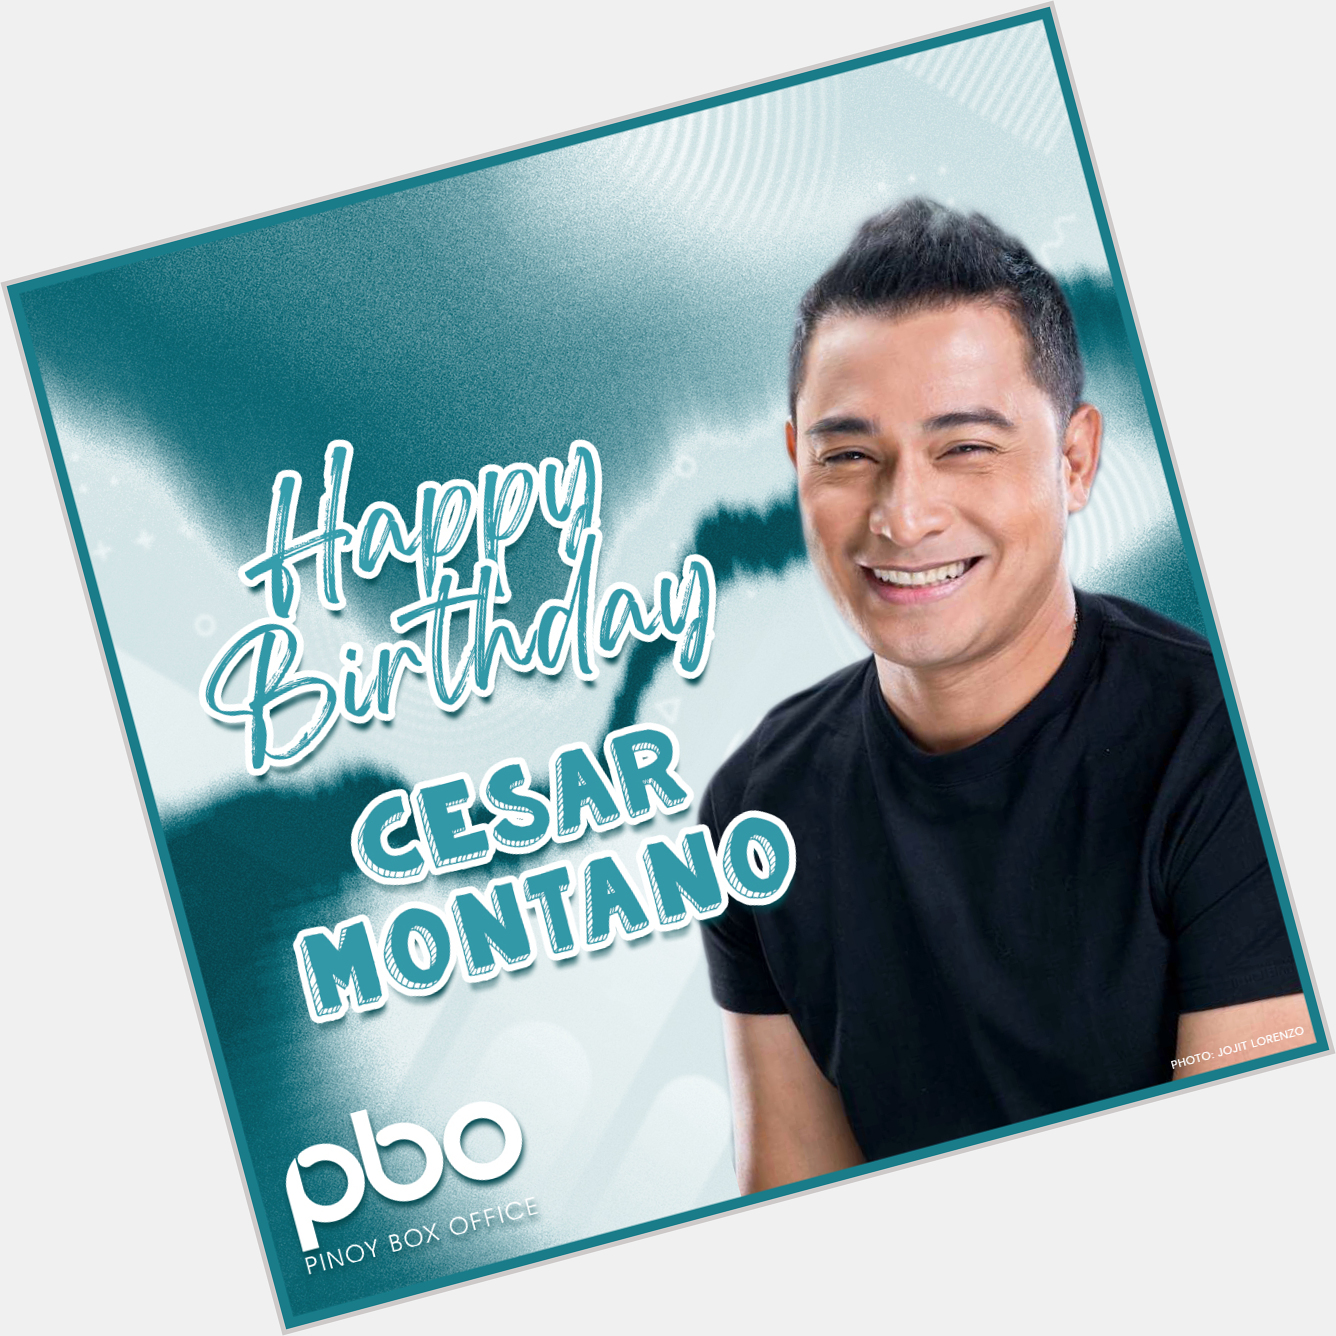 Happy birthday, Cesar Montano! May your special day be amazing just like you! 